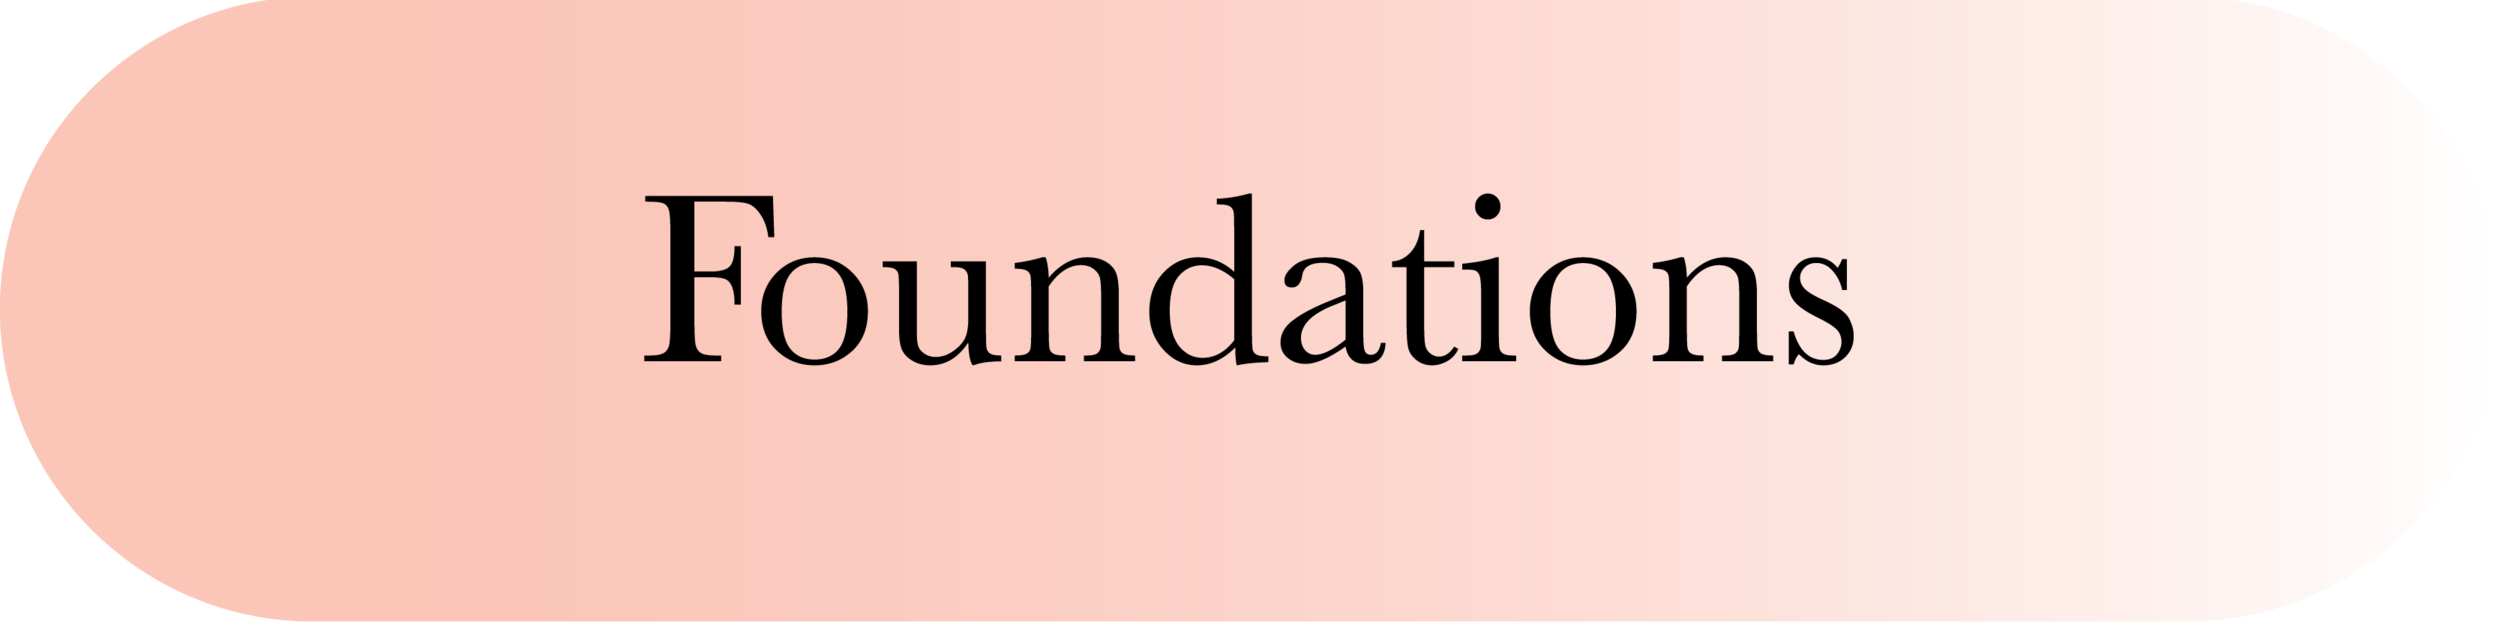 foundations.png